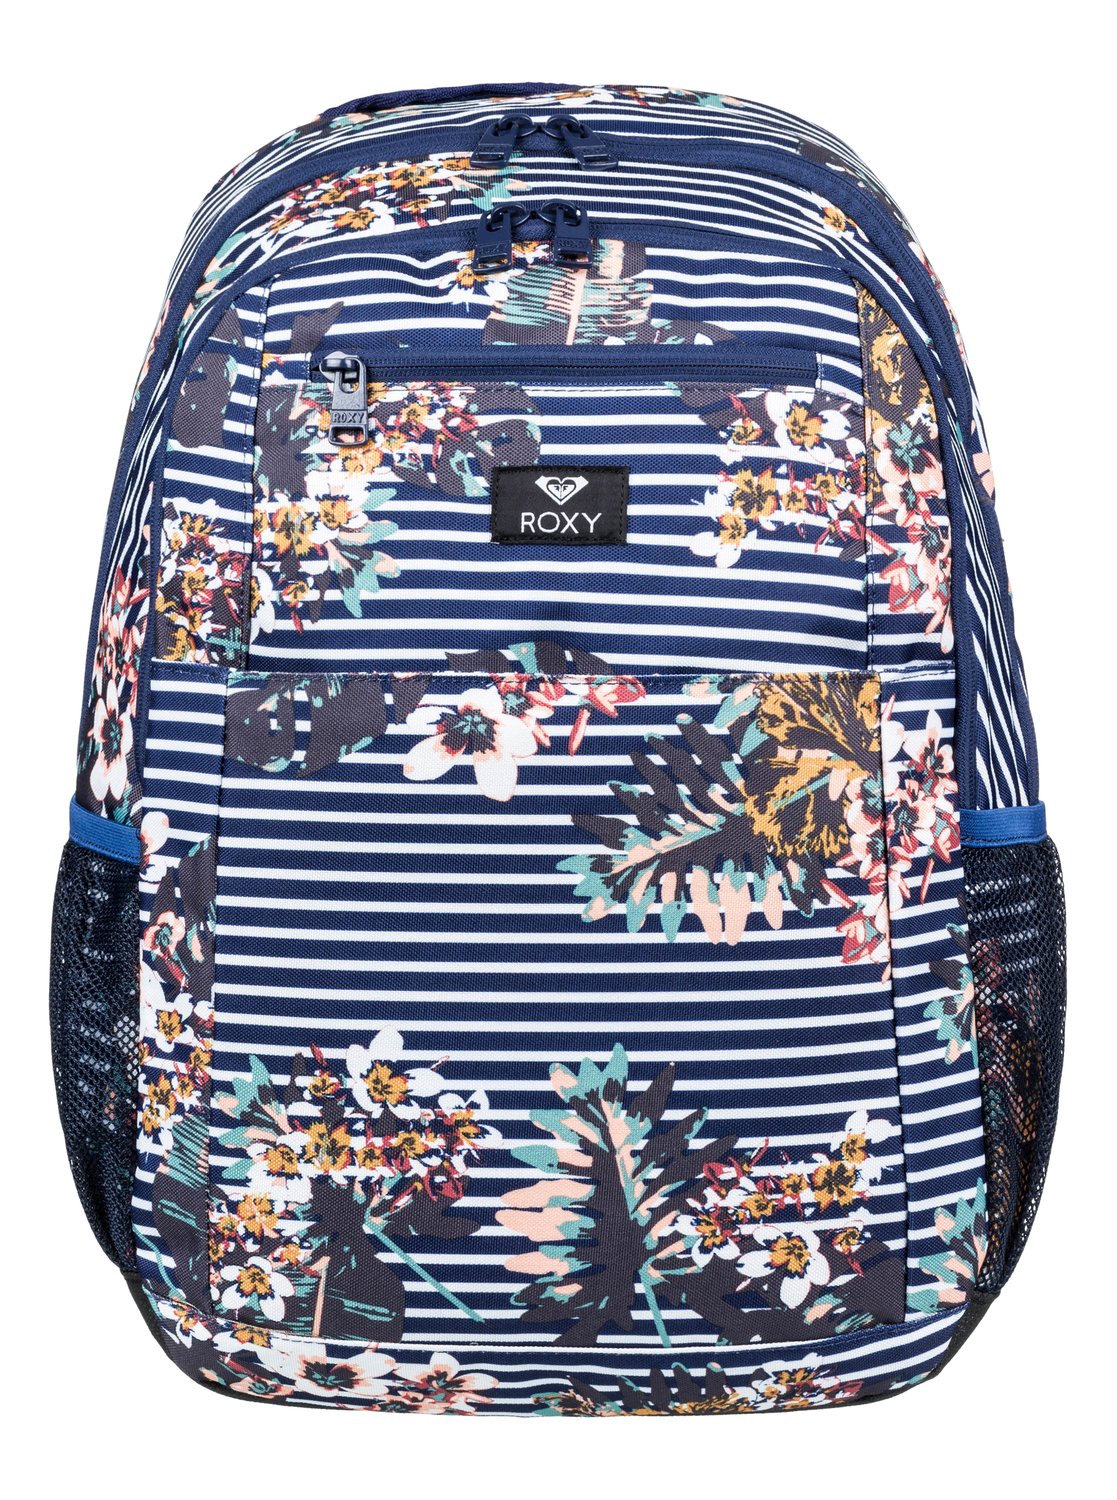 Here You Are 23.5 L Medium Backpack